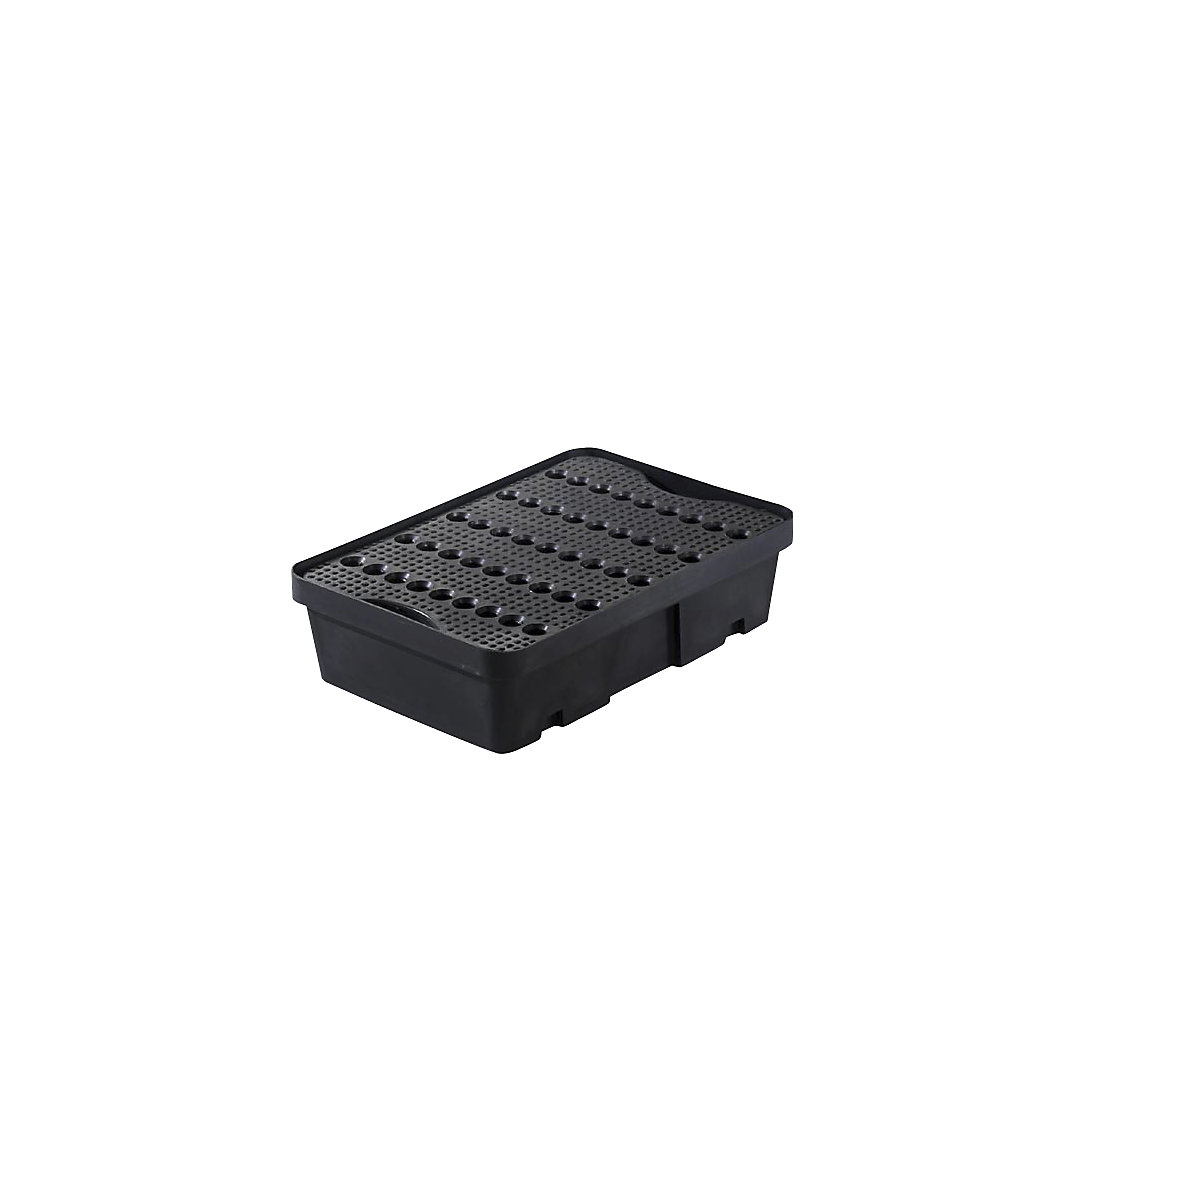 Small container pallet tray, made of polyethylene (LDPE), capacity 20 l, with PE grate-11